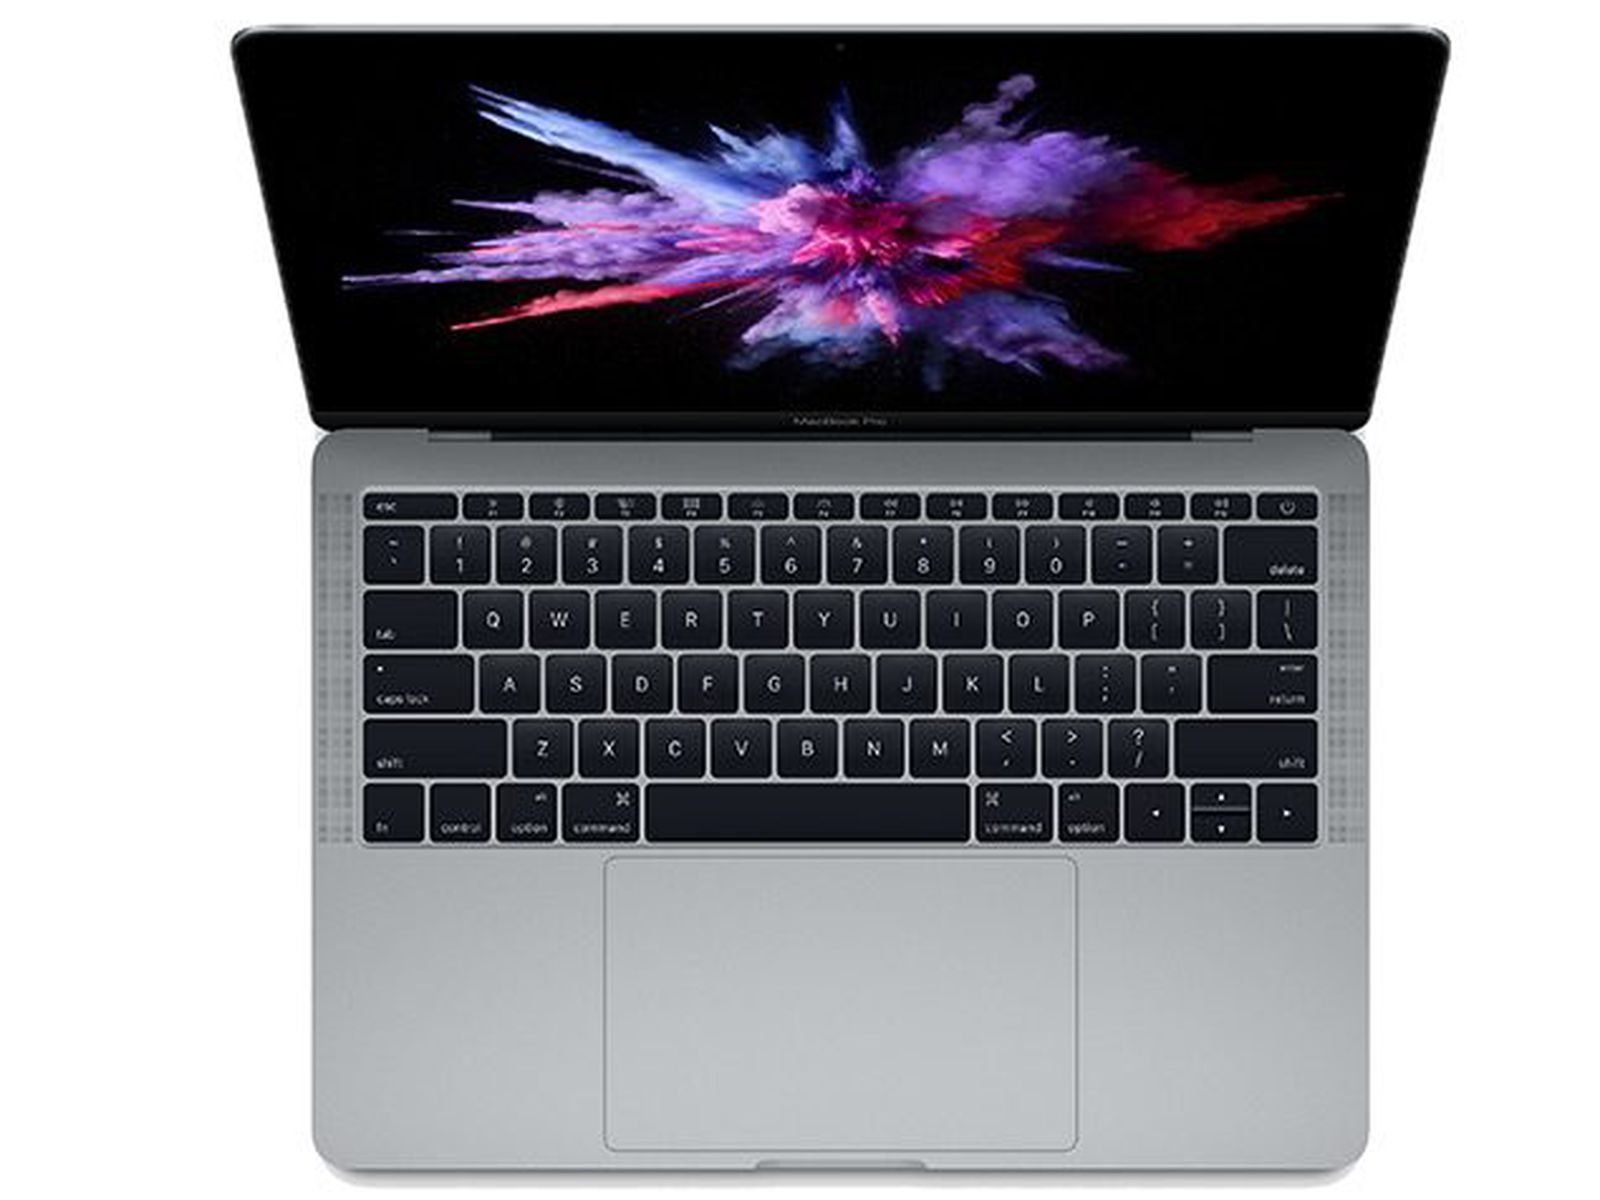 Apple No Longer Sells a MacBook Pro Without a Touch Bar - MacRumors